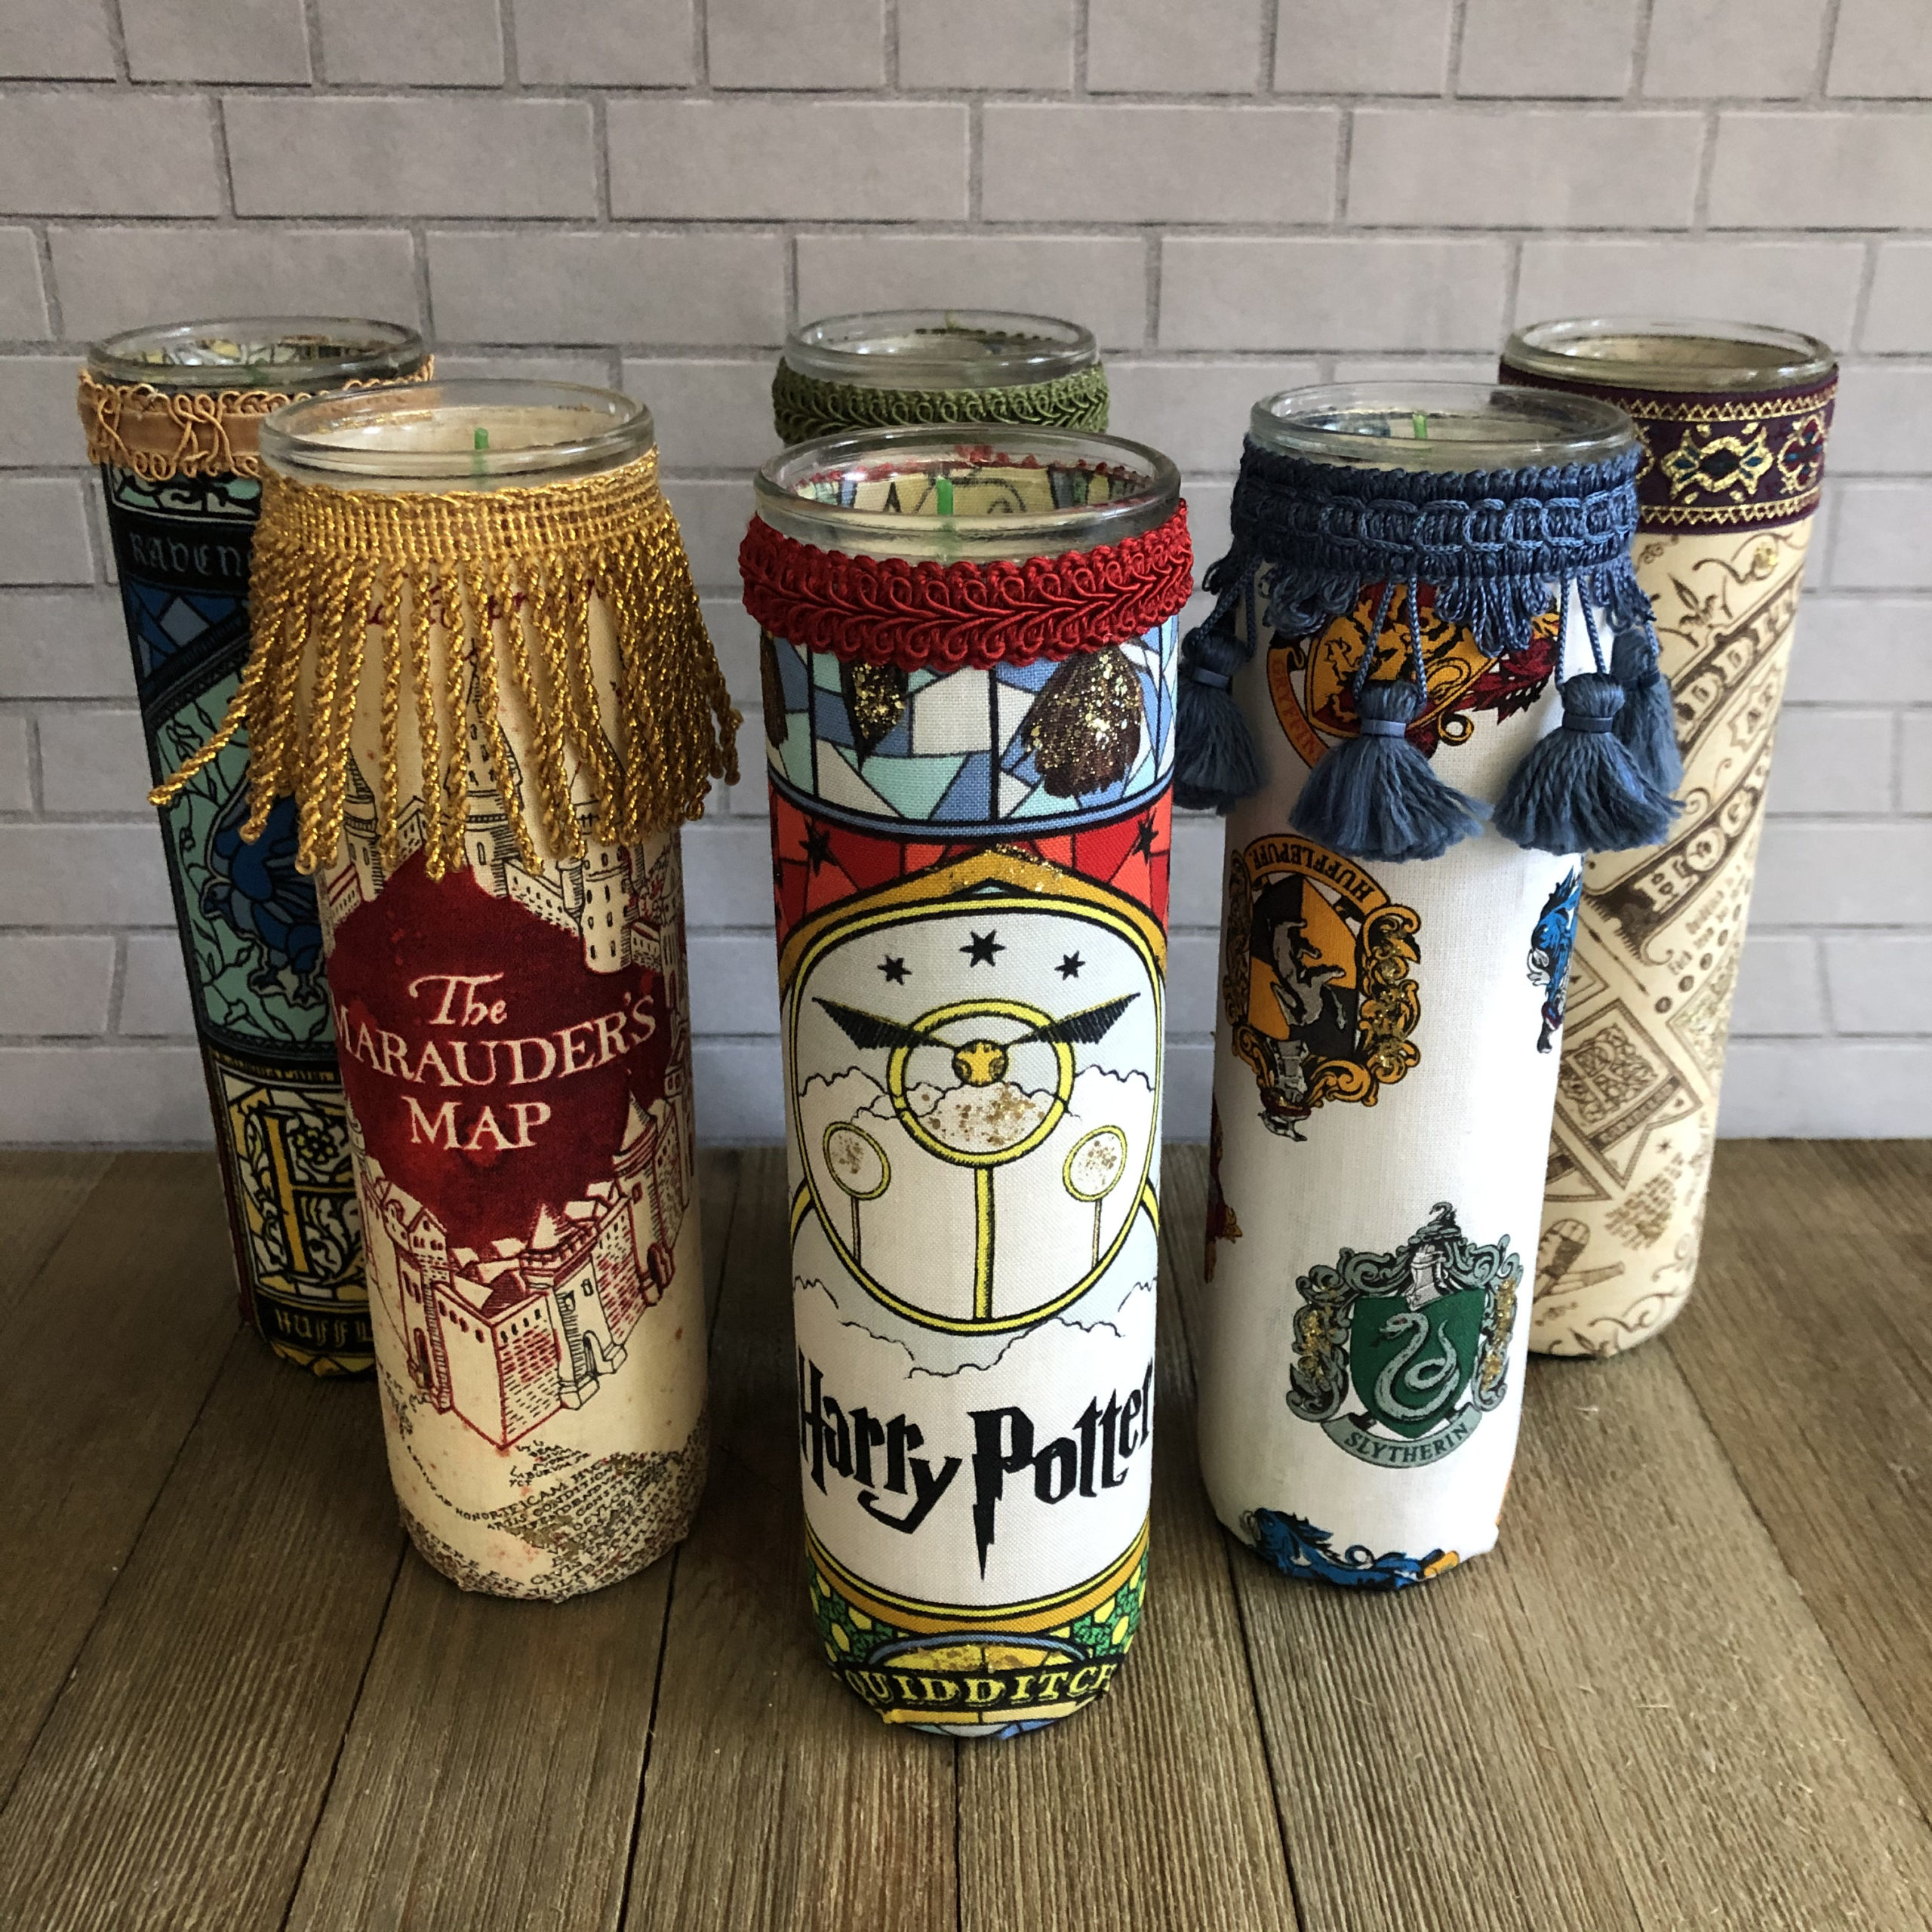 Couture Kreations - My popular Harry Potter tumbler 🧡. • • • #harrypotter  #tumblers #igtumblers #tumblersofIG #tumblersofinstagram #customcups #diy  #personalizedtumbler